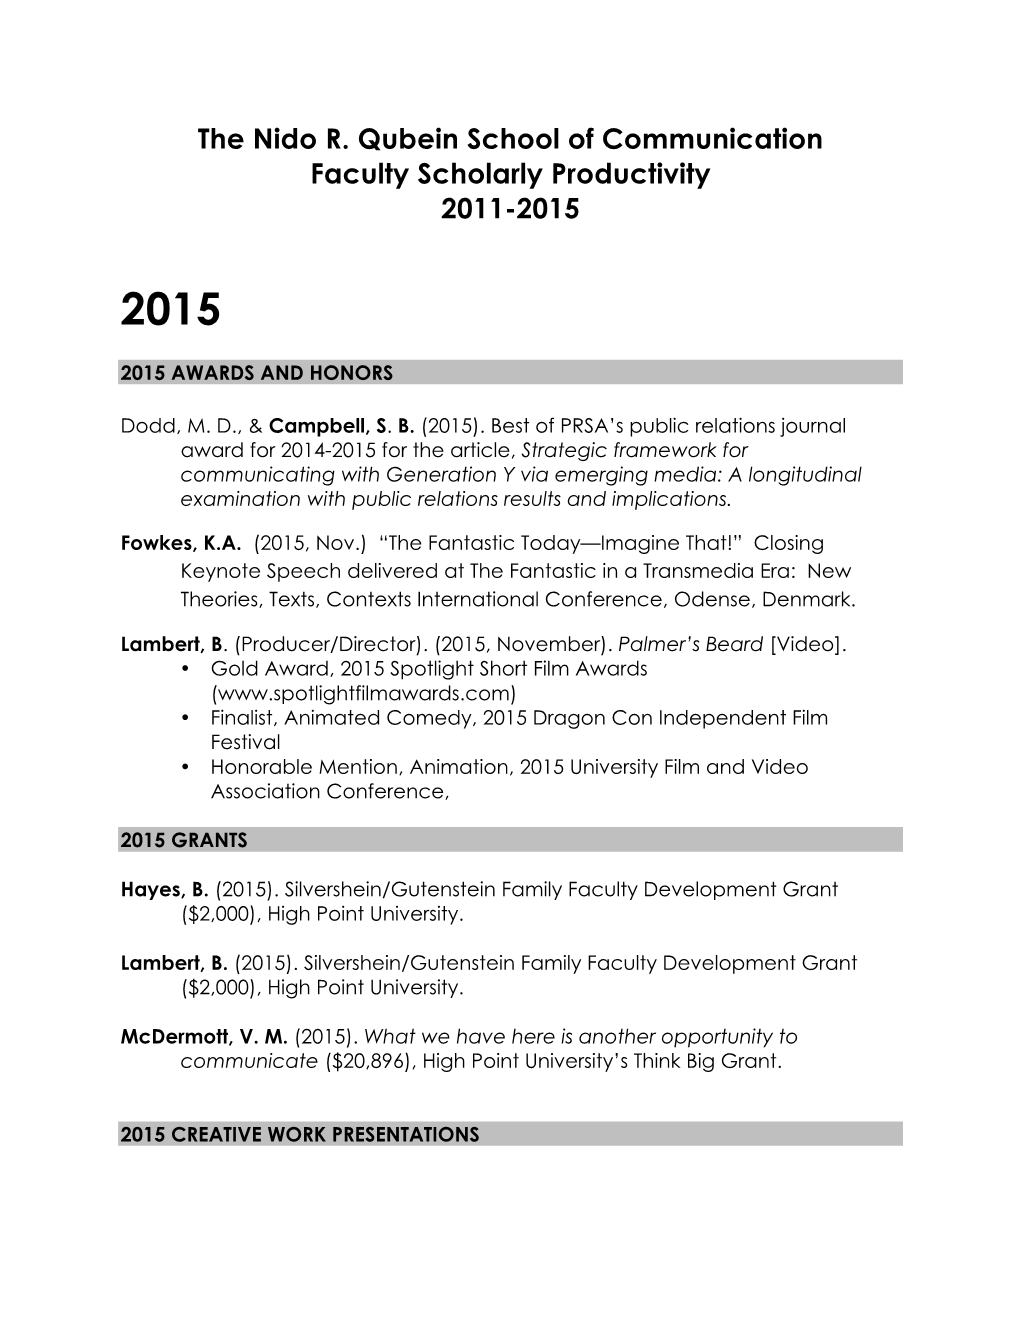 The Nido R. Qubein School of Communication Faculty Scholarly Productivity 2011-2015